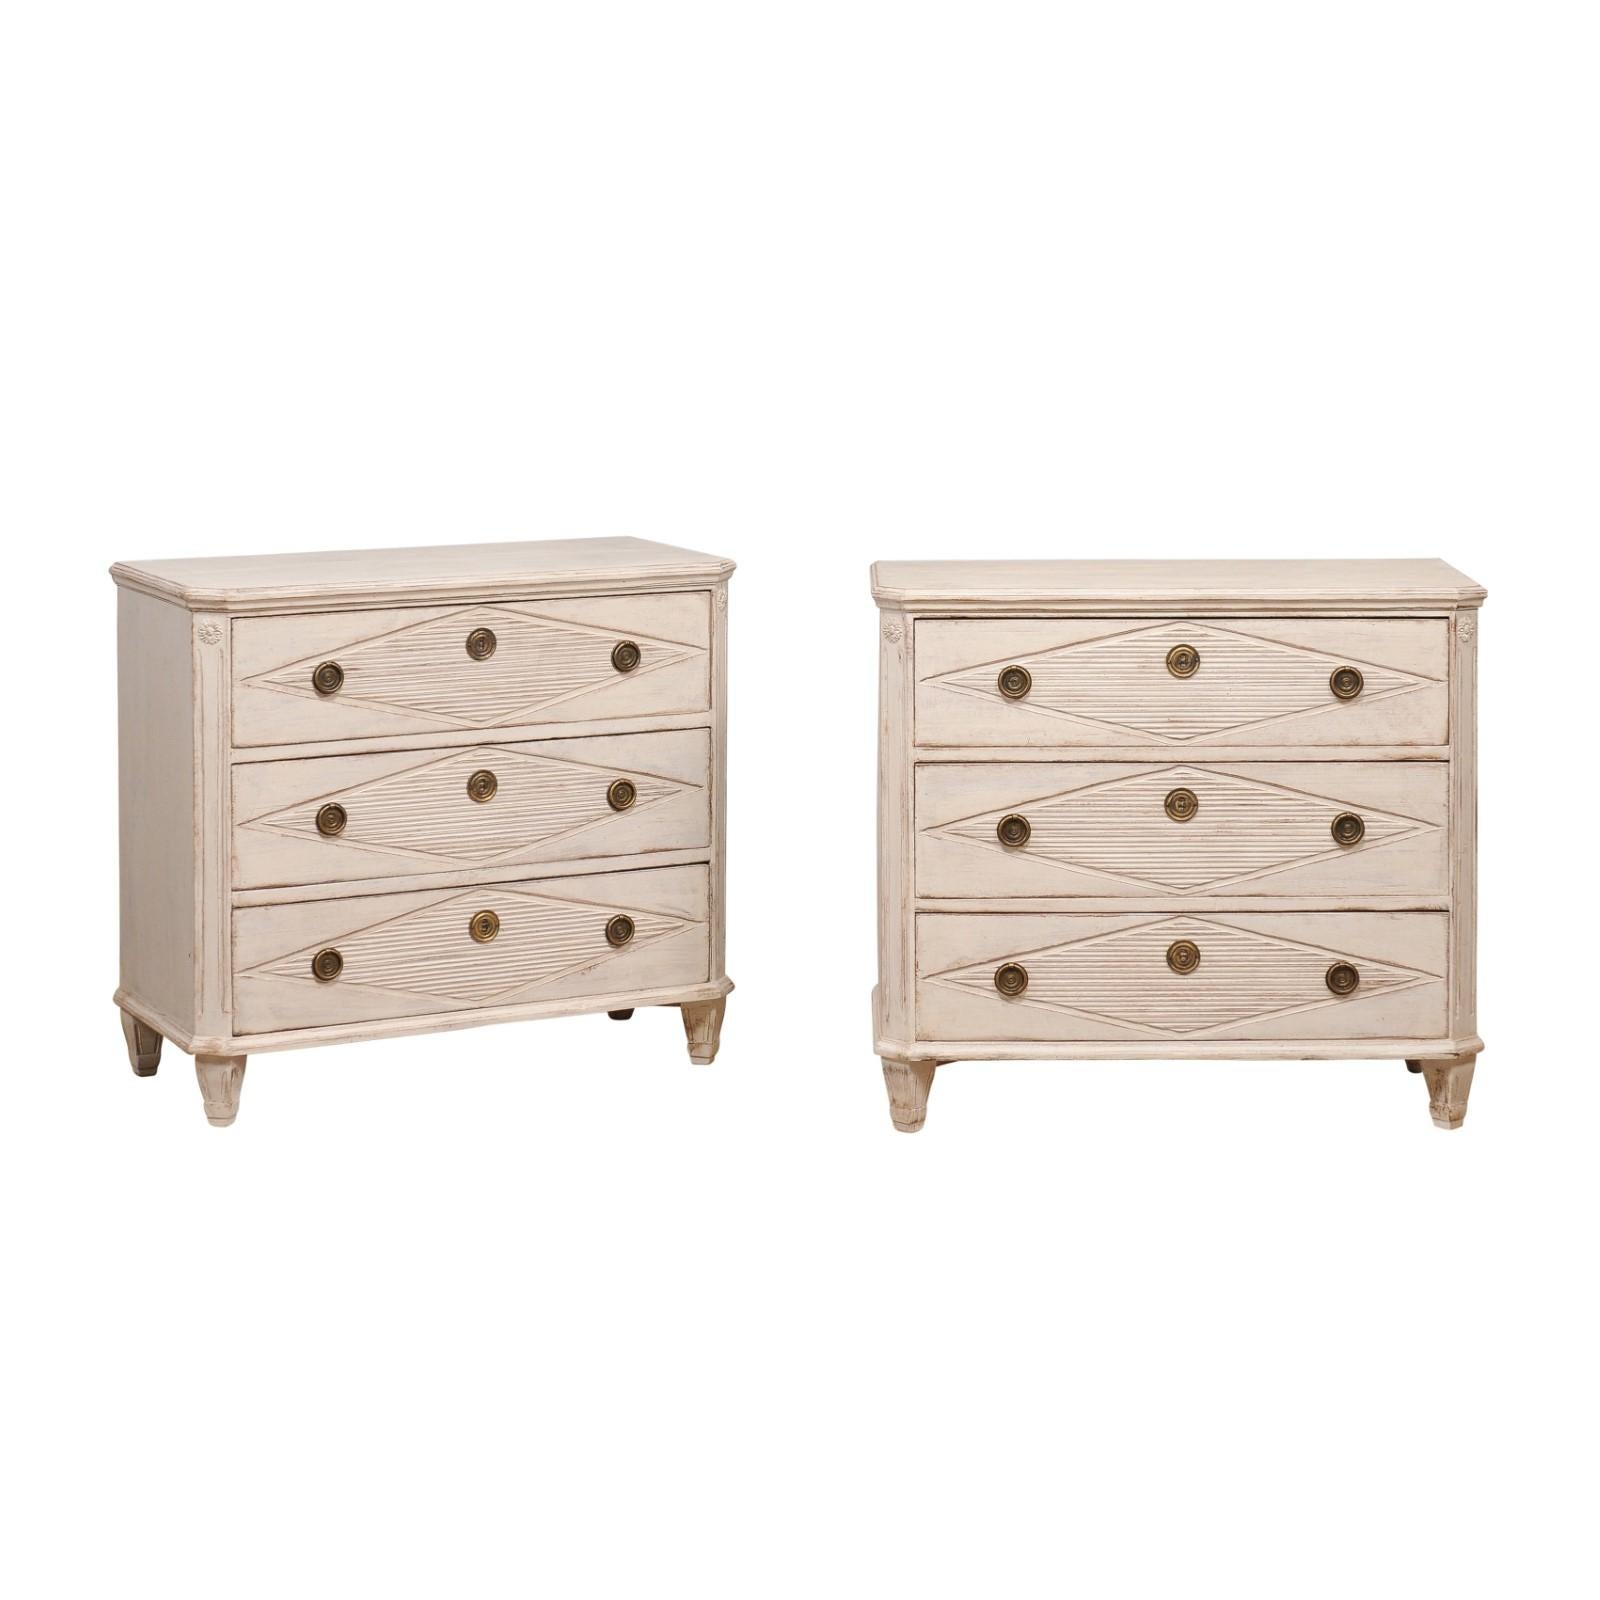 A pair of Swedish Gustavian style painted wood chests from the 19th century with three drawers each, carved reeded diamond motifs, canted side posts and tapered feet. This stunning pair of Swedish Gustavian style painted wood chests, hailing from